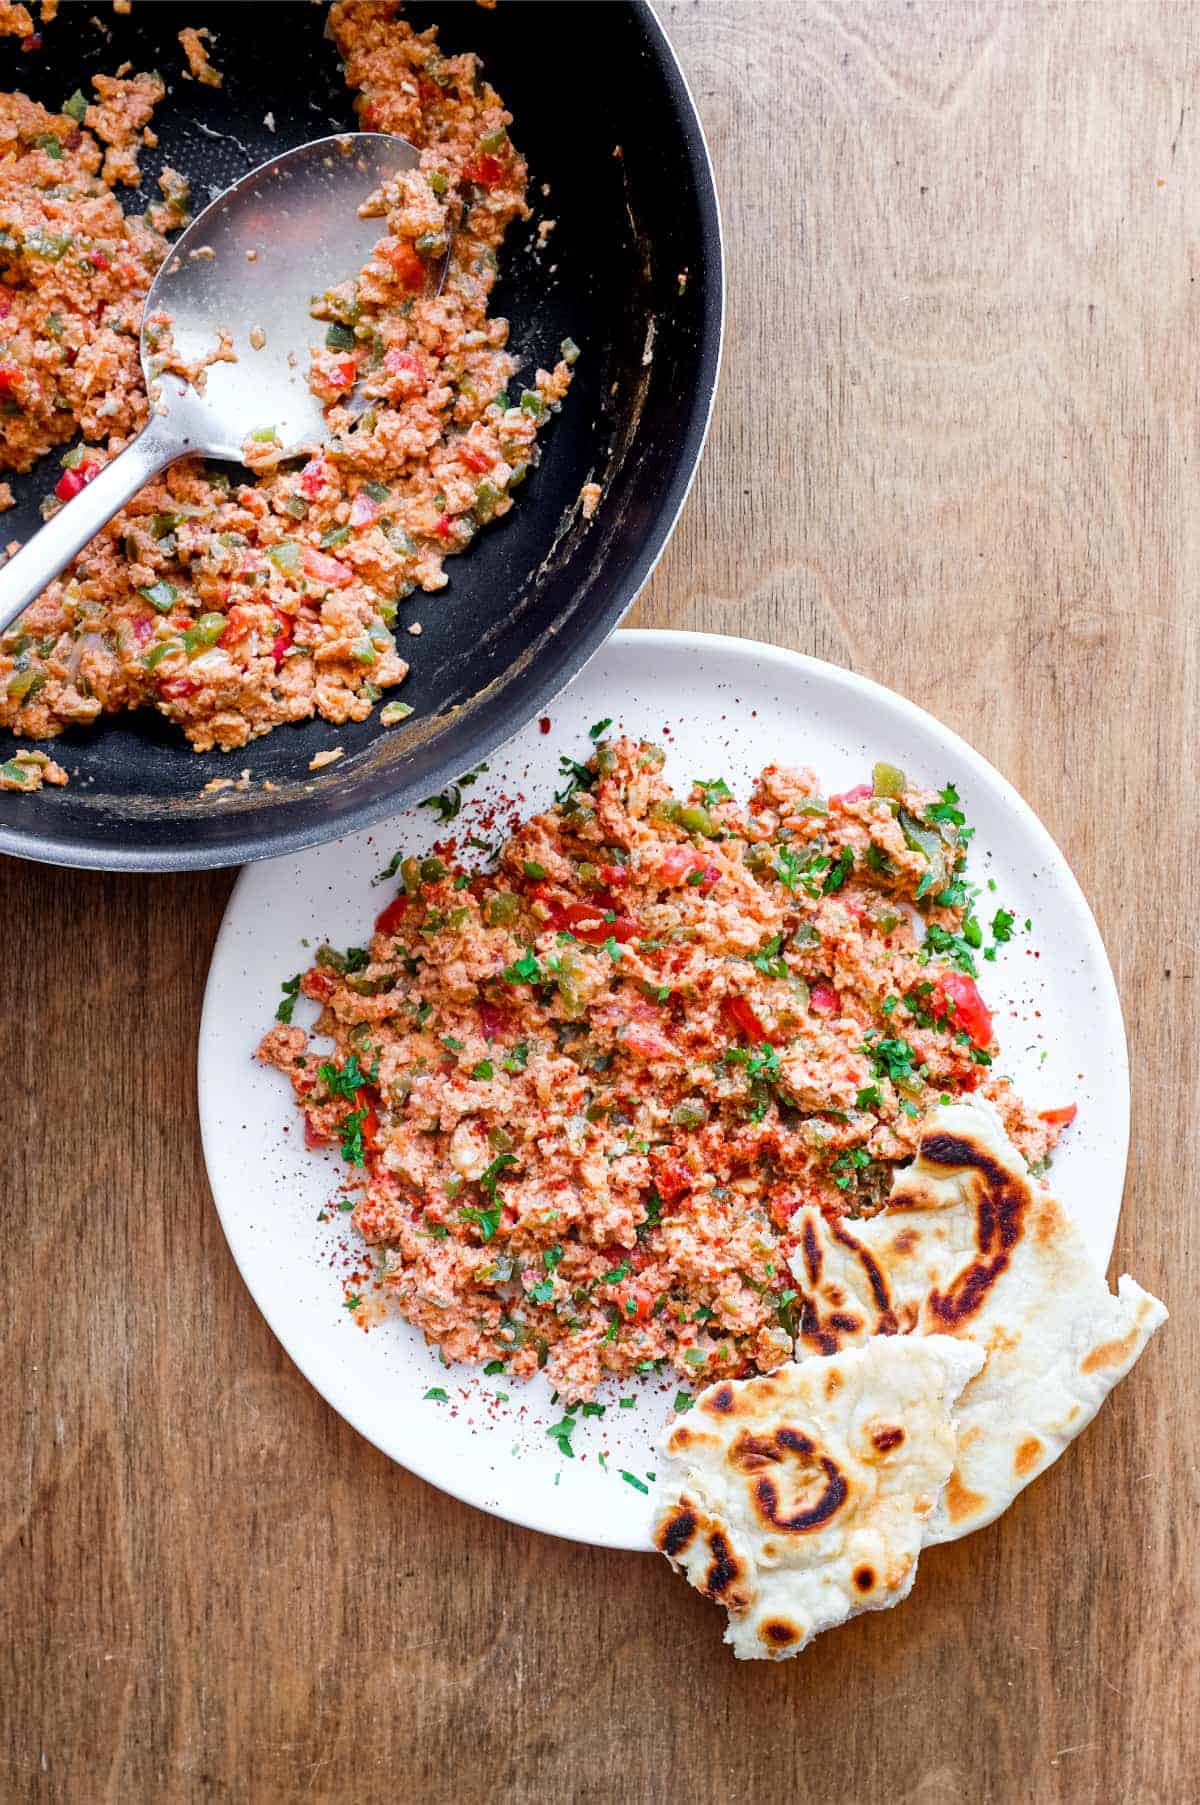 A pan of Turkish menemen alongside a plate with a portion of eggs